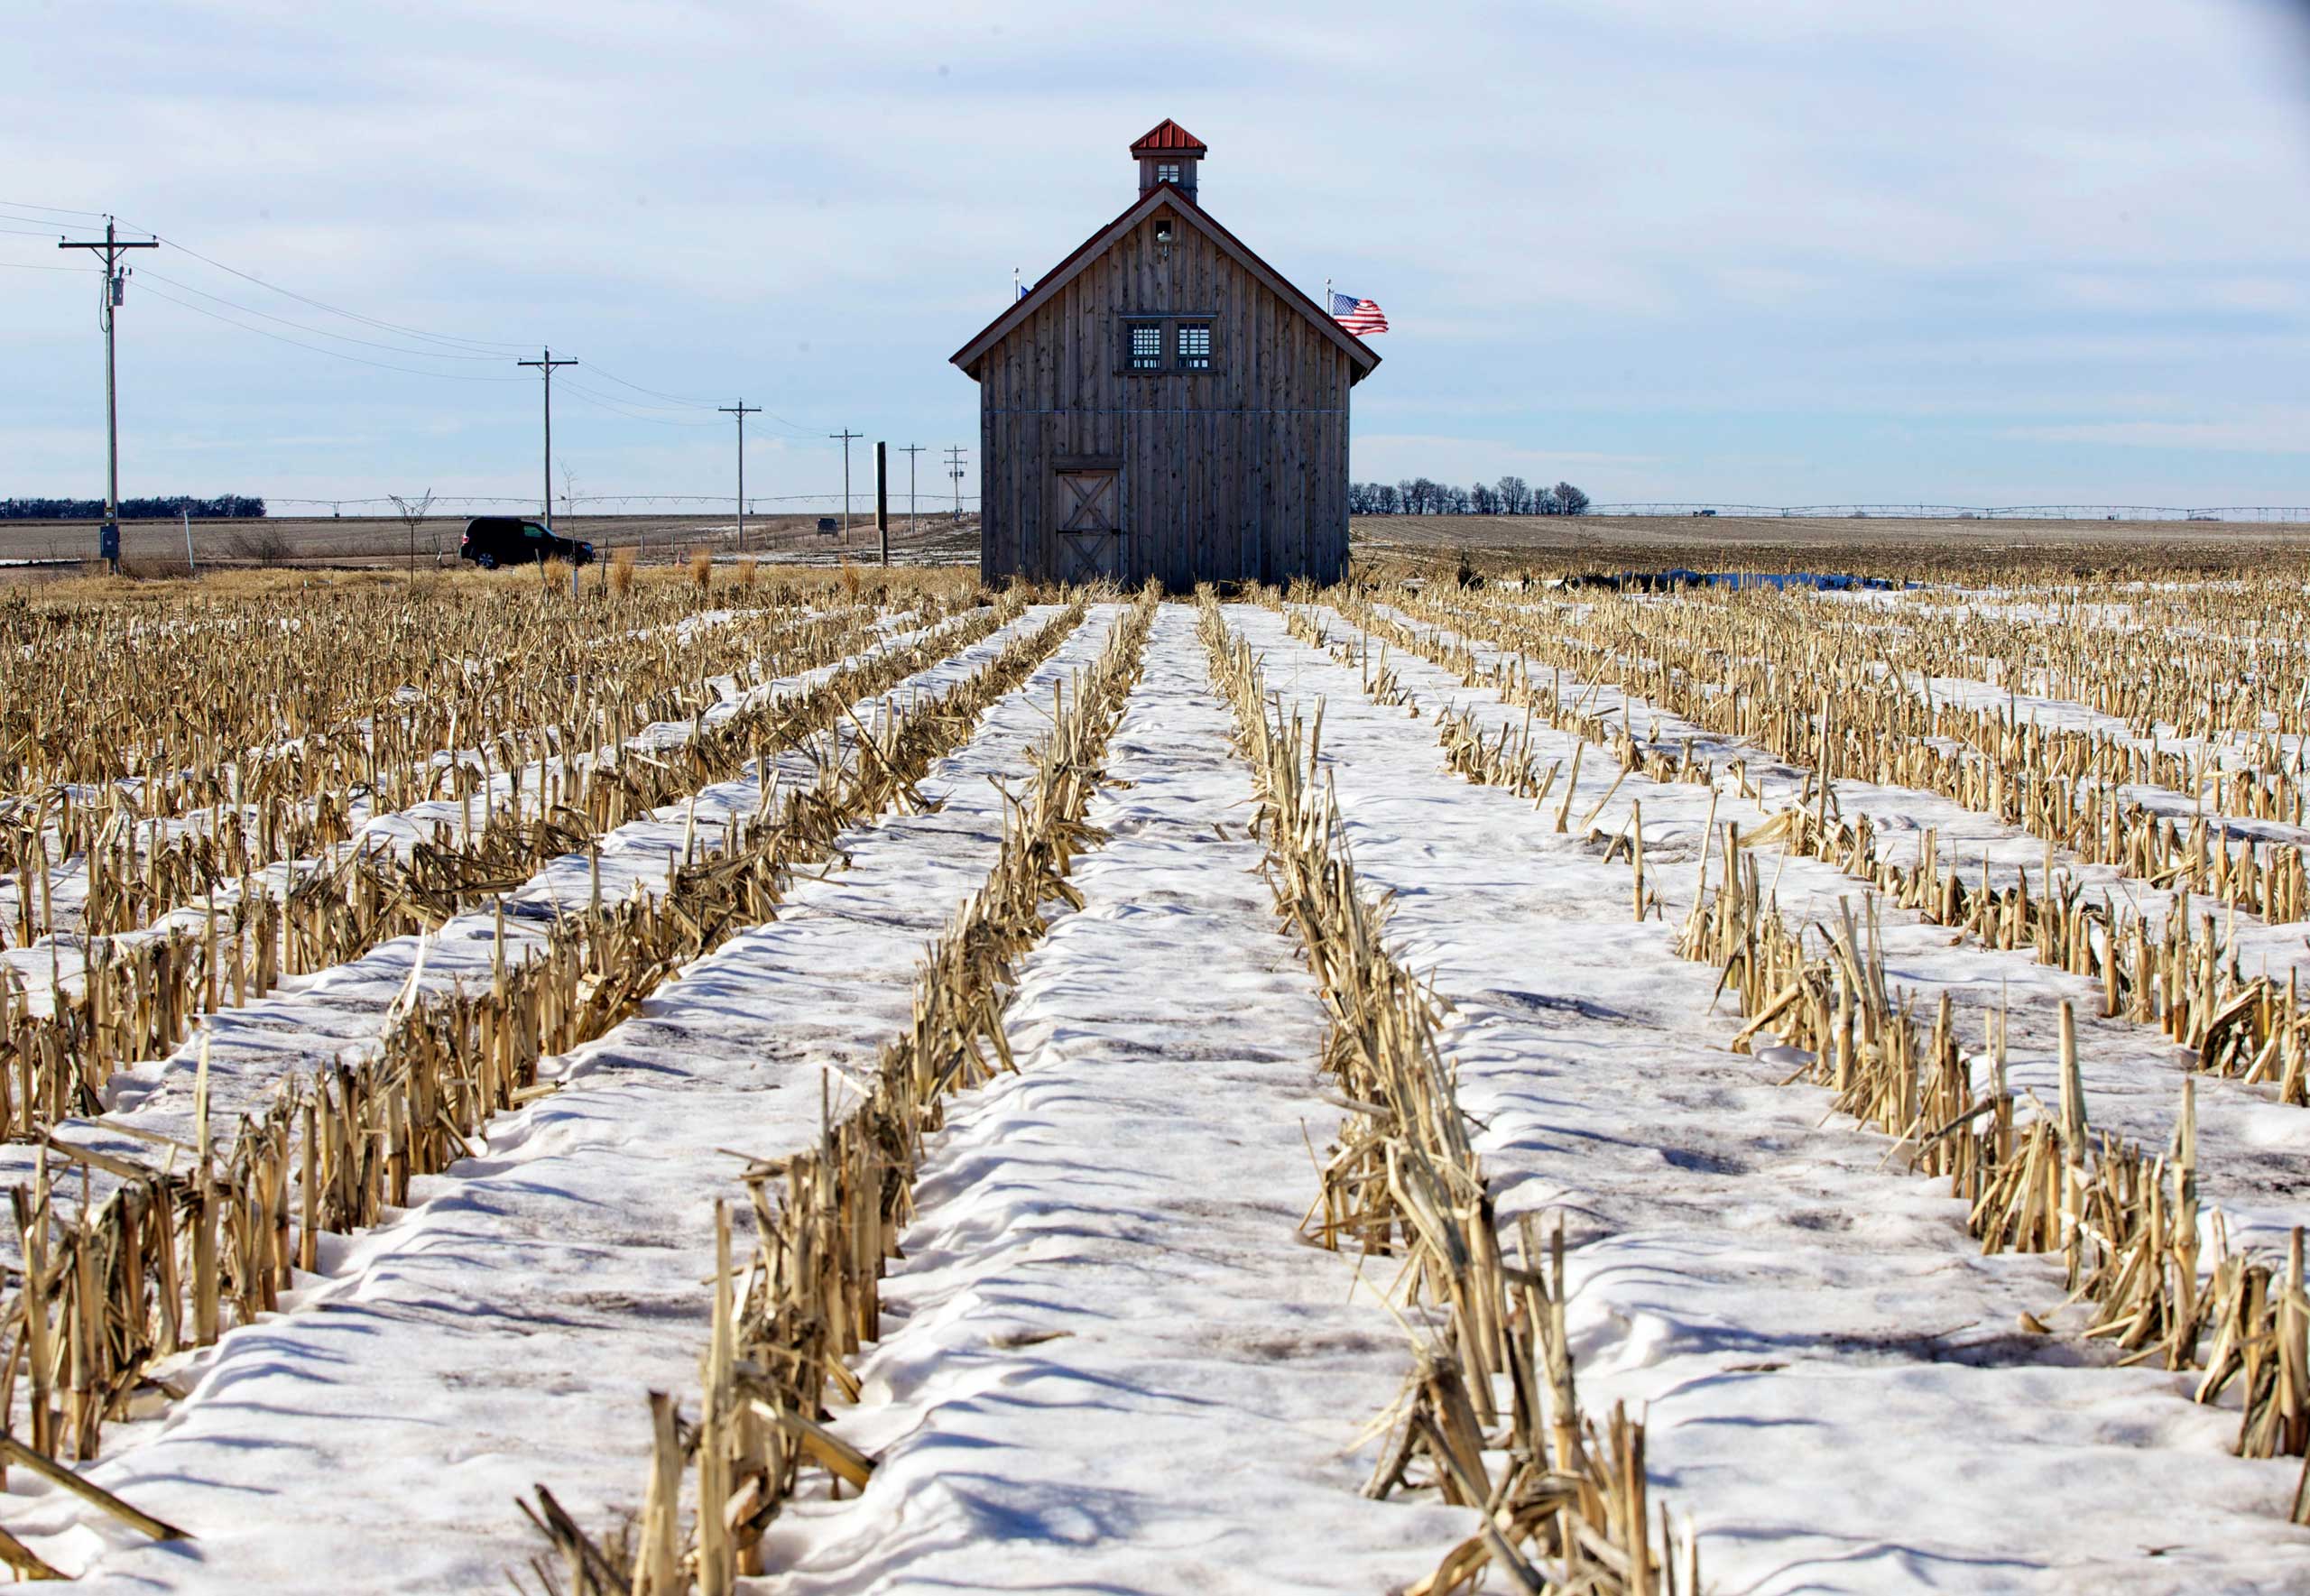 Jan. 16, 2015. A barn, part of the Energy Barn Project built by anti-pipeline activists on the route of the Keystone XL pipeline, stands in a snowy corn field near Bradshaw, Neb. The White House has threatened to veto Republicans' bill to approve the construction of the Keystone XL oil pipeline.